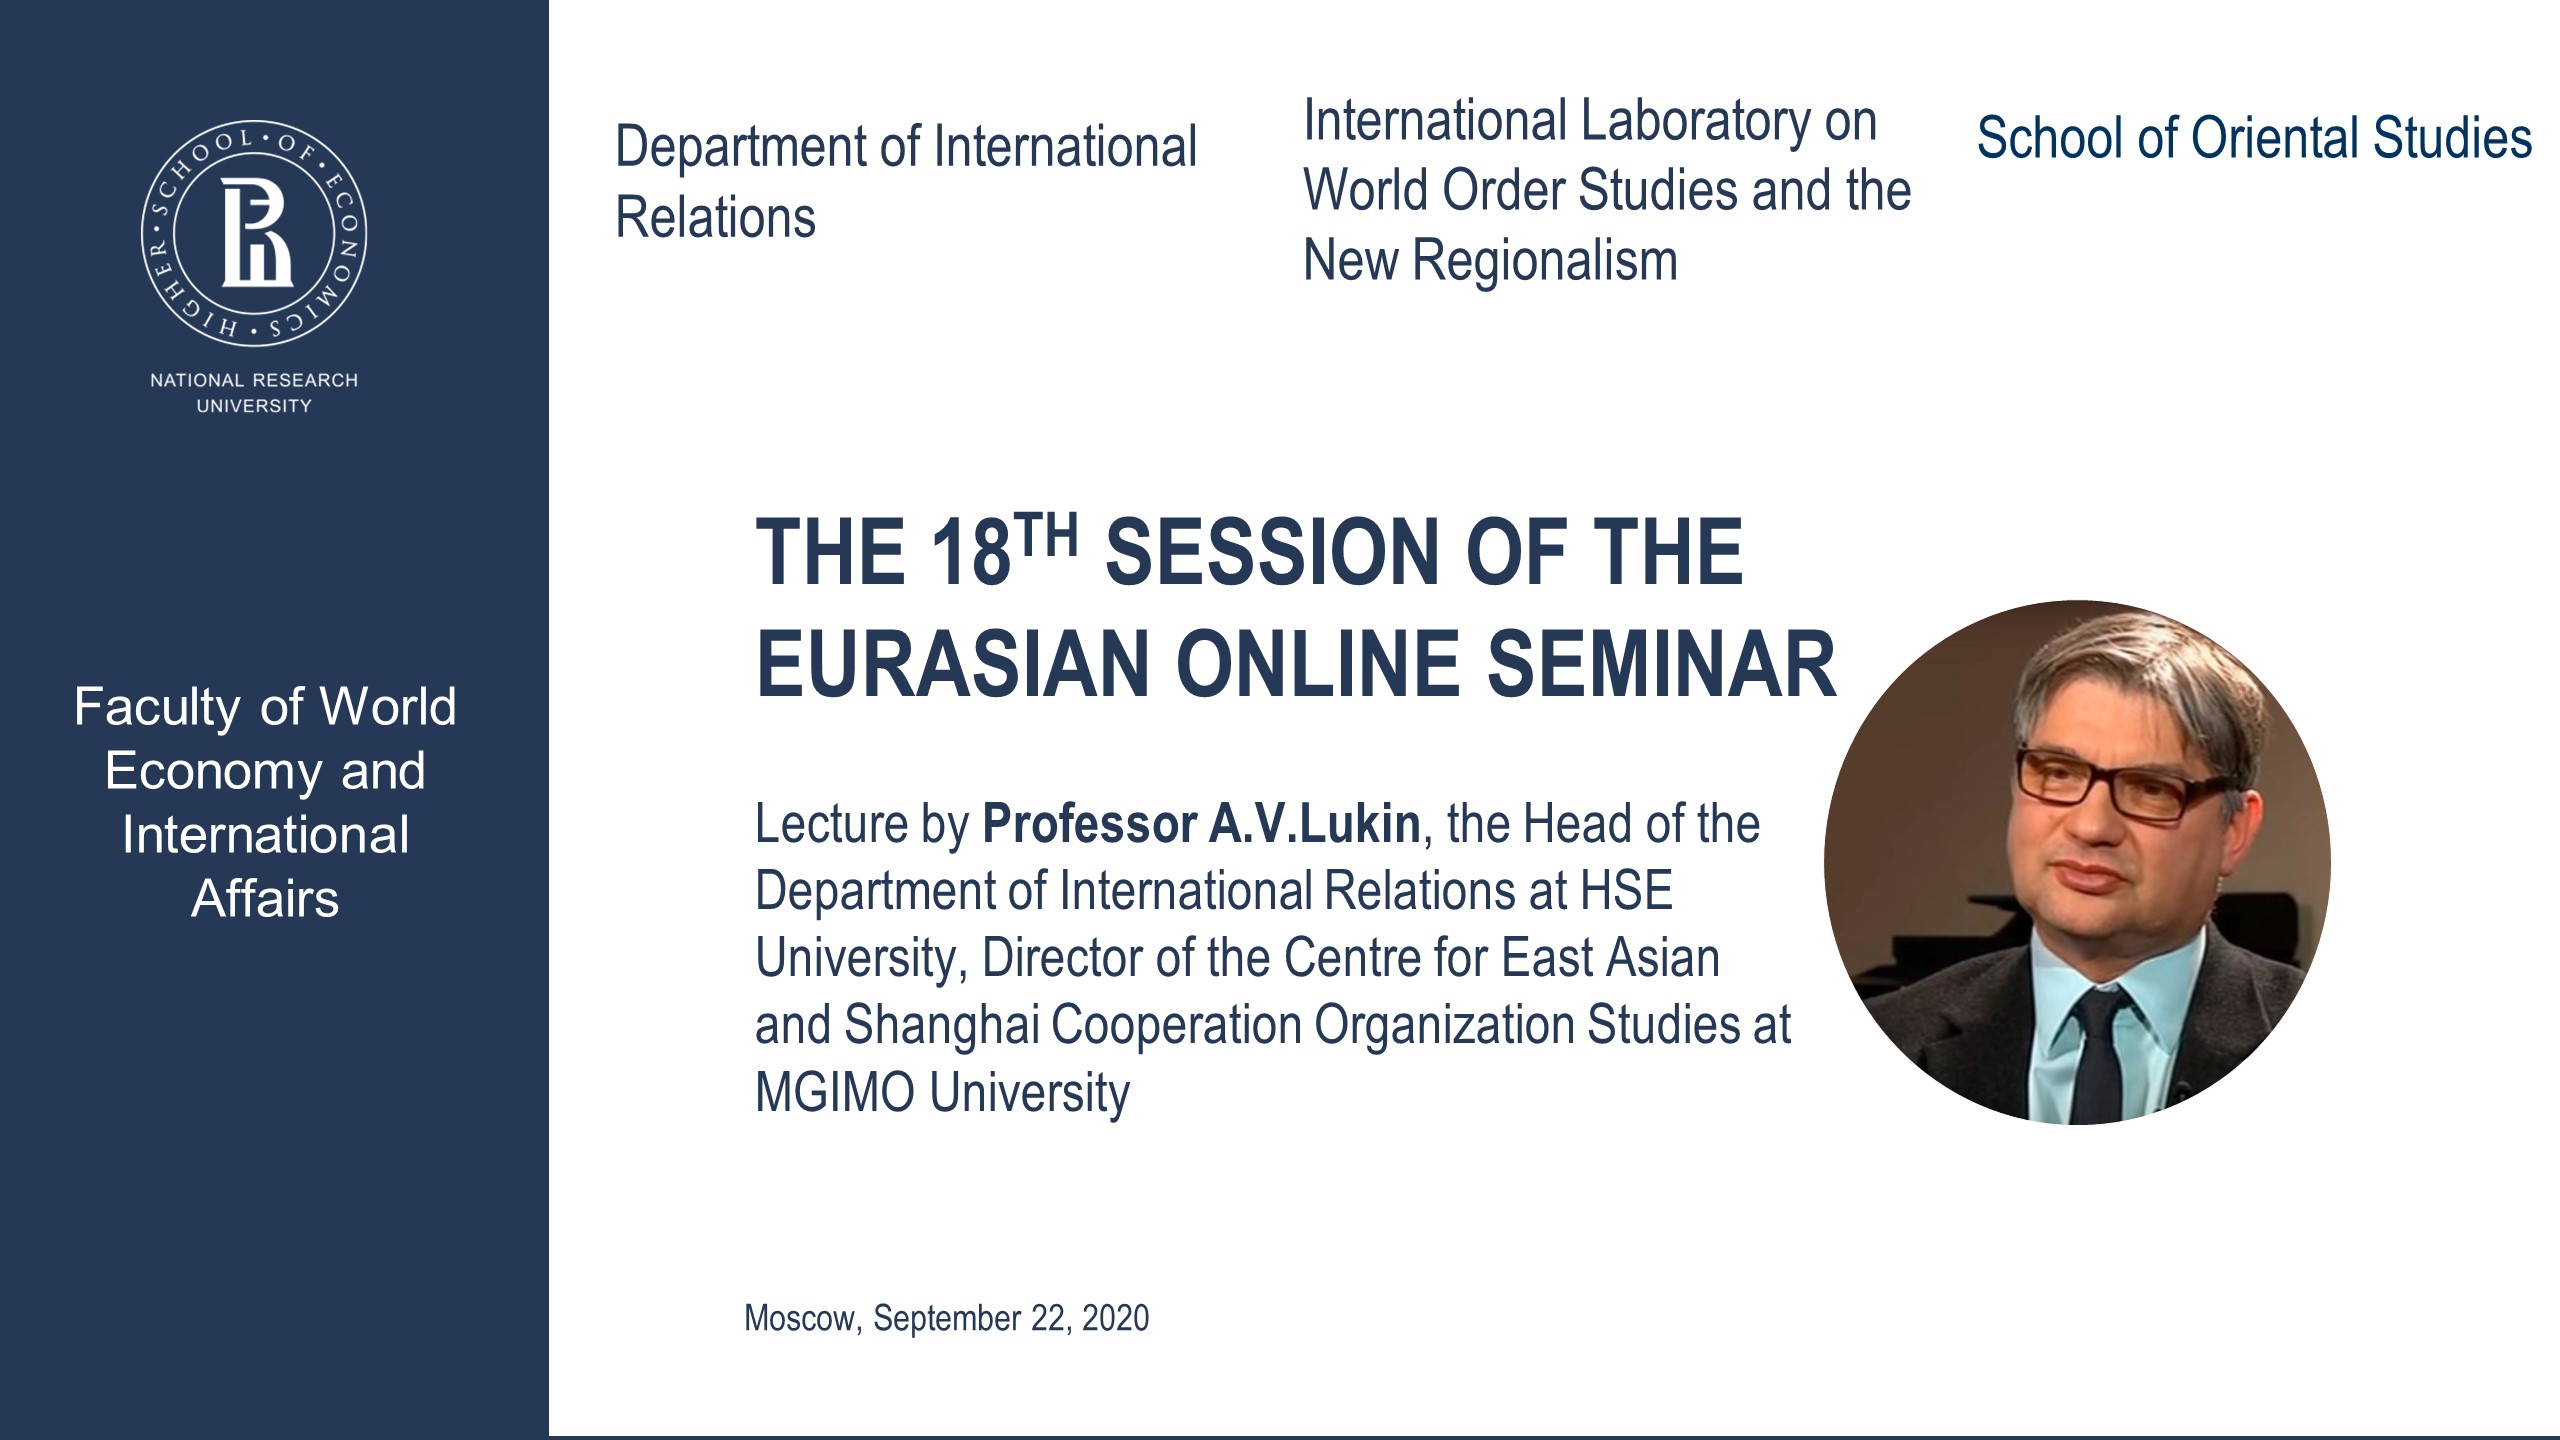 The 18th Session of Eurasian Online Seminar with Professor Alexander Lukin